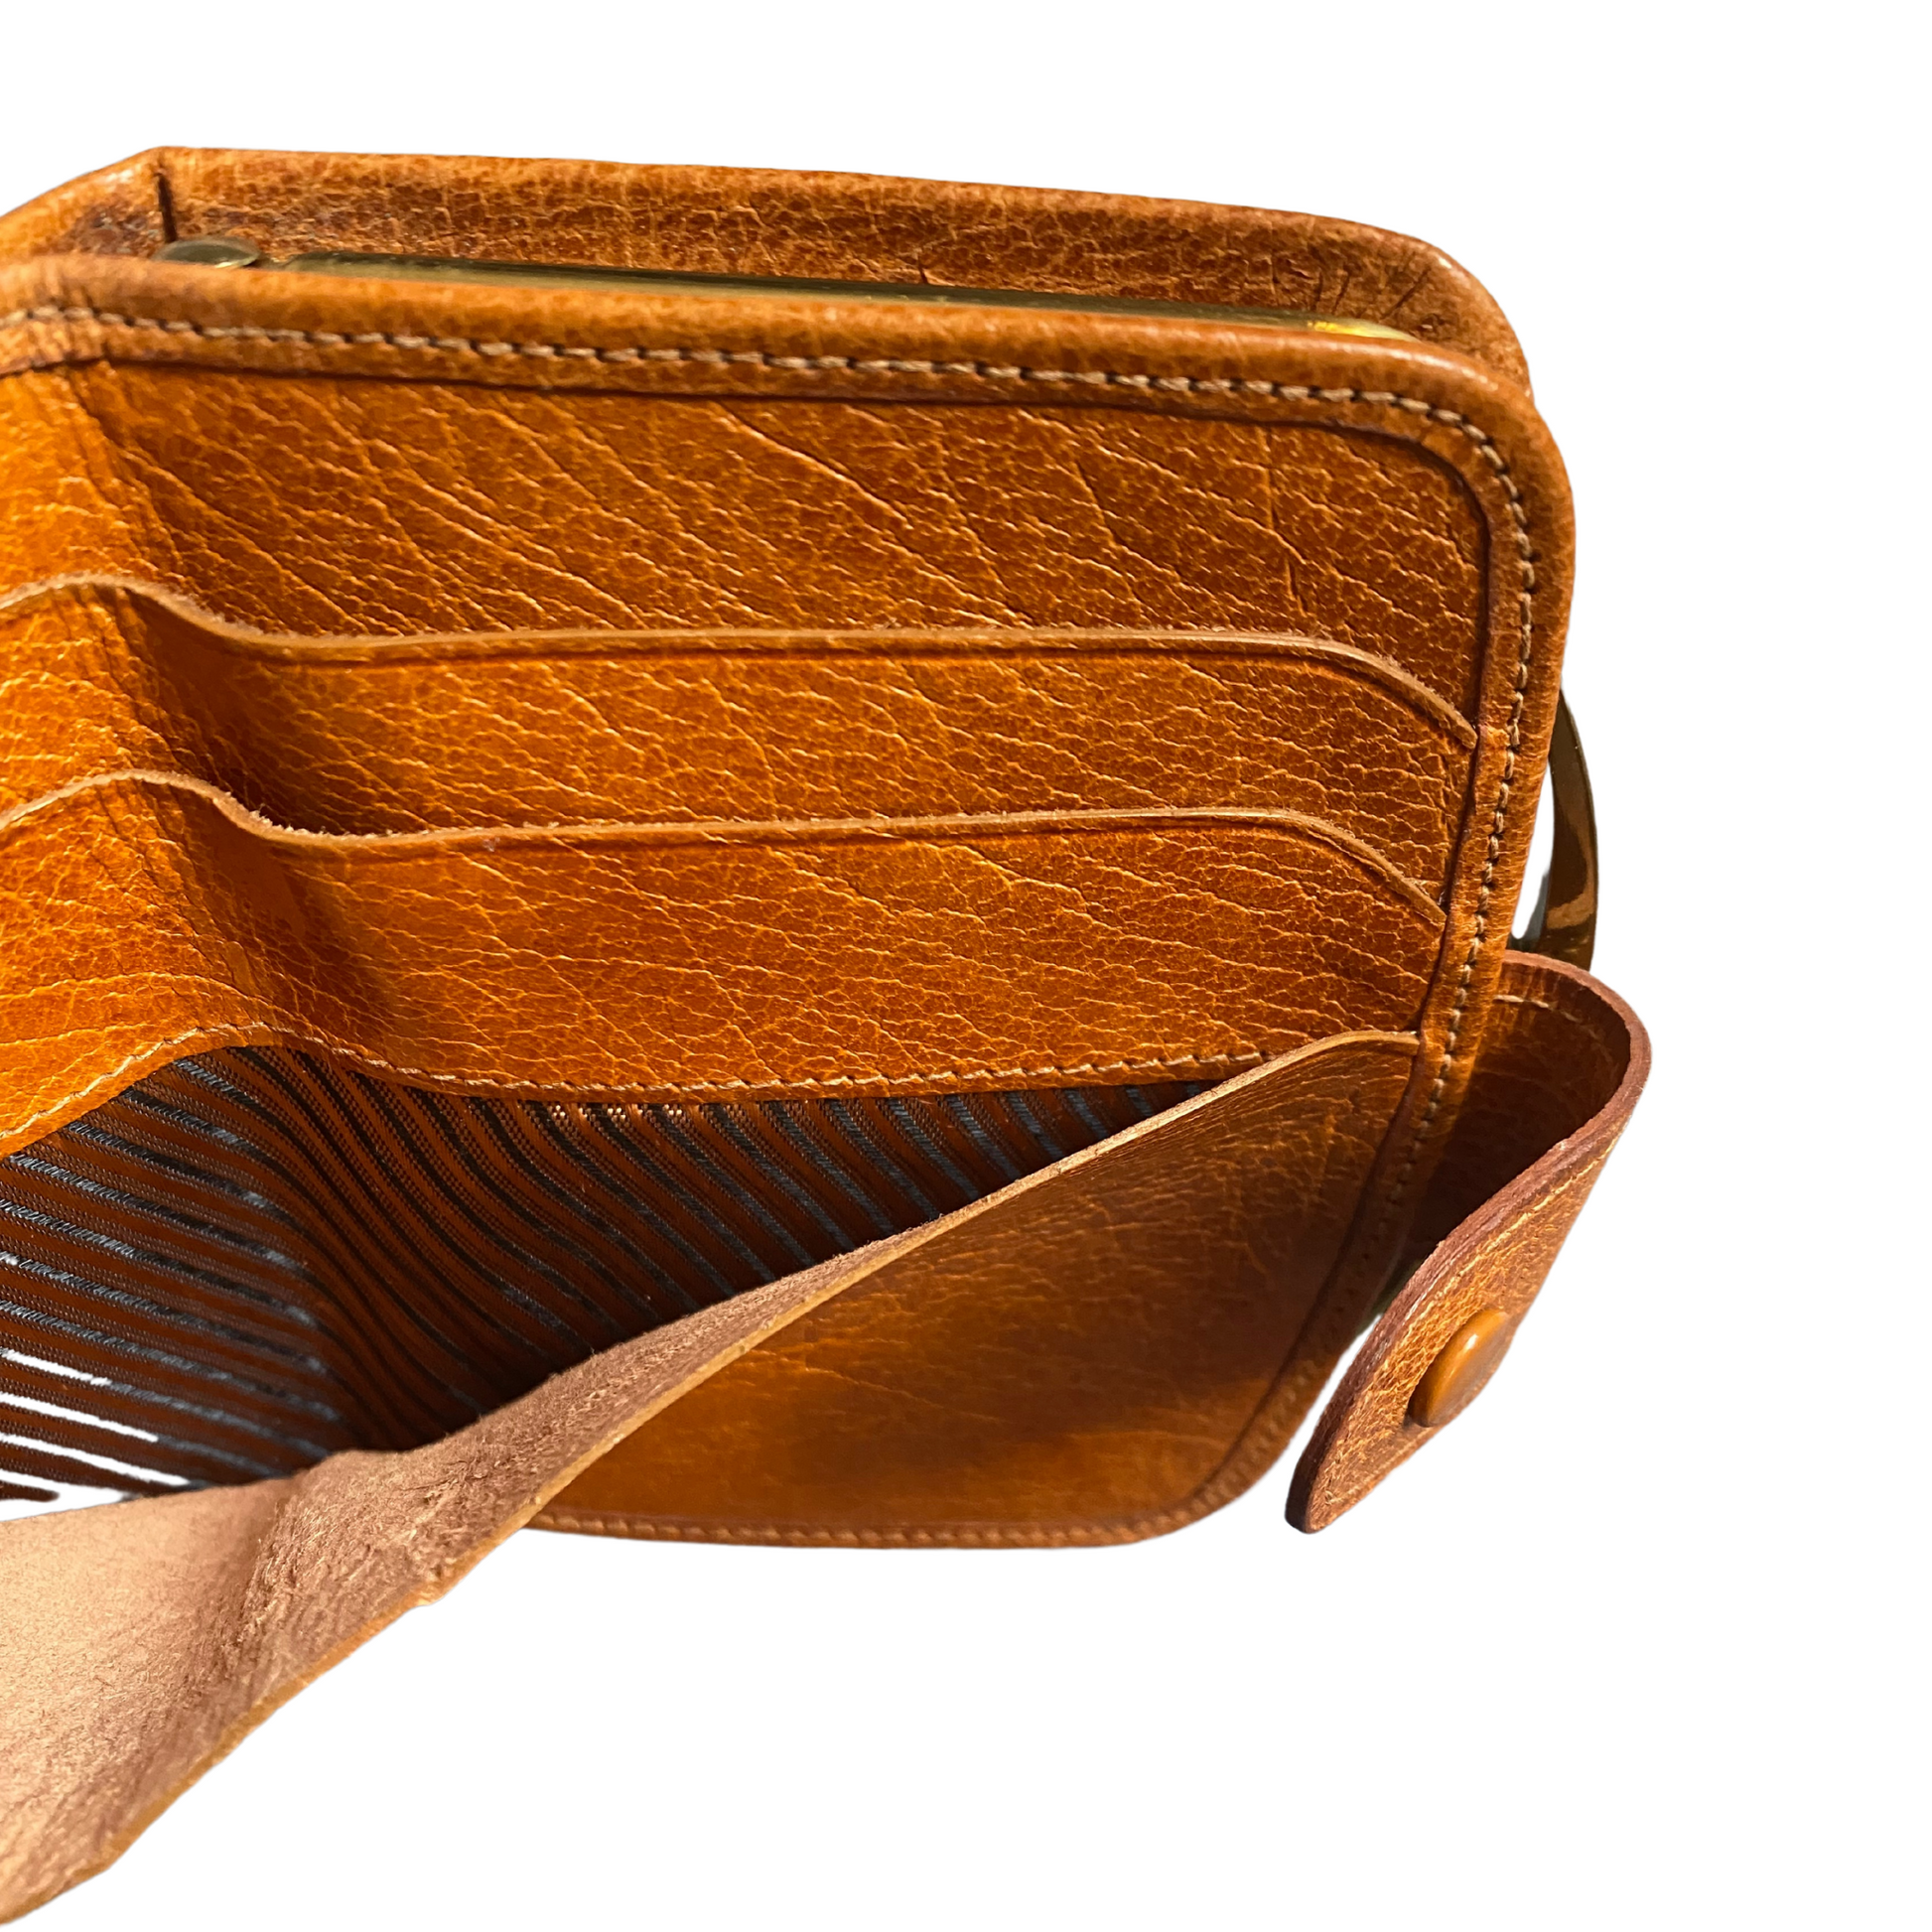 British-made real leather purse/wallet with ample space for essentials